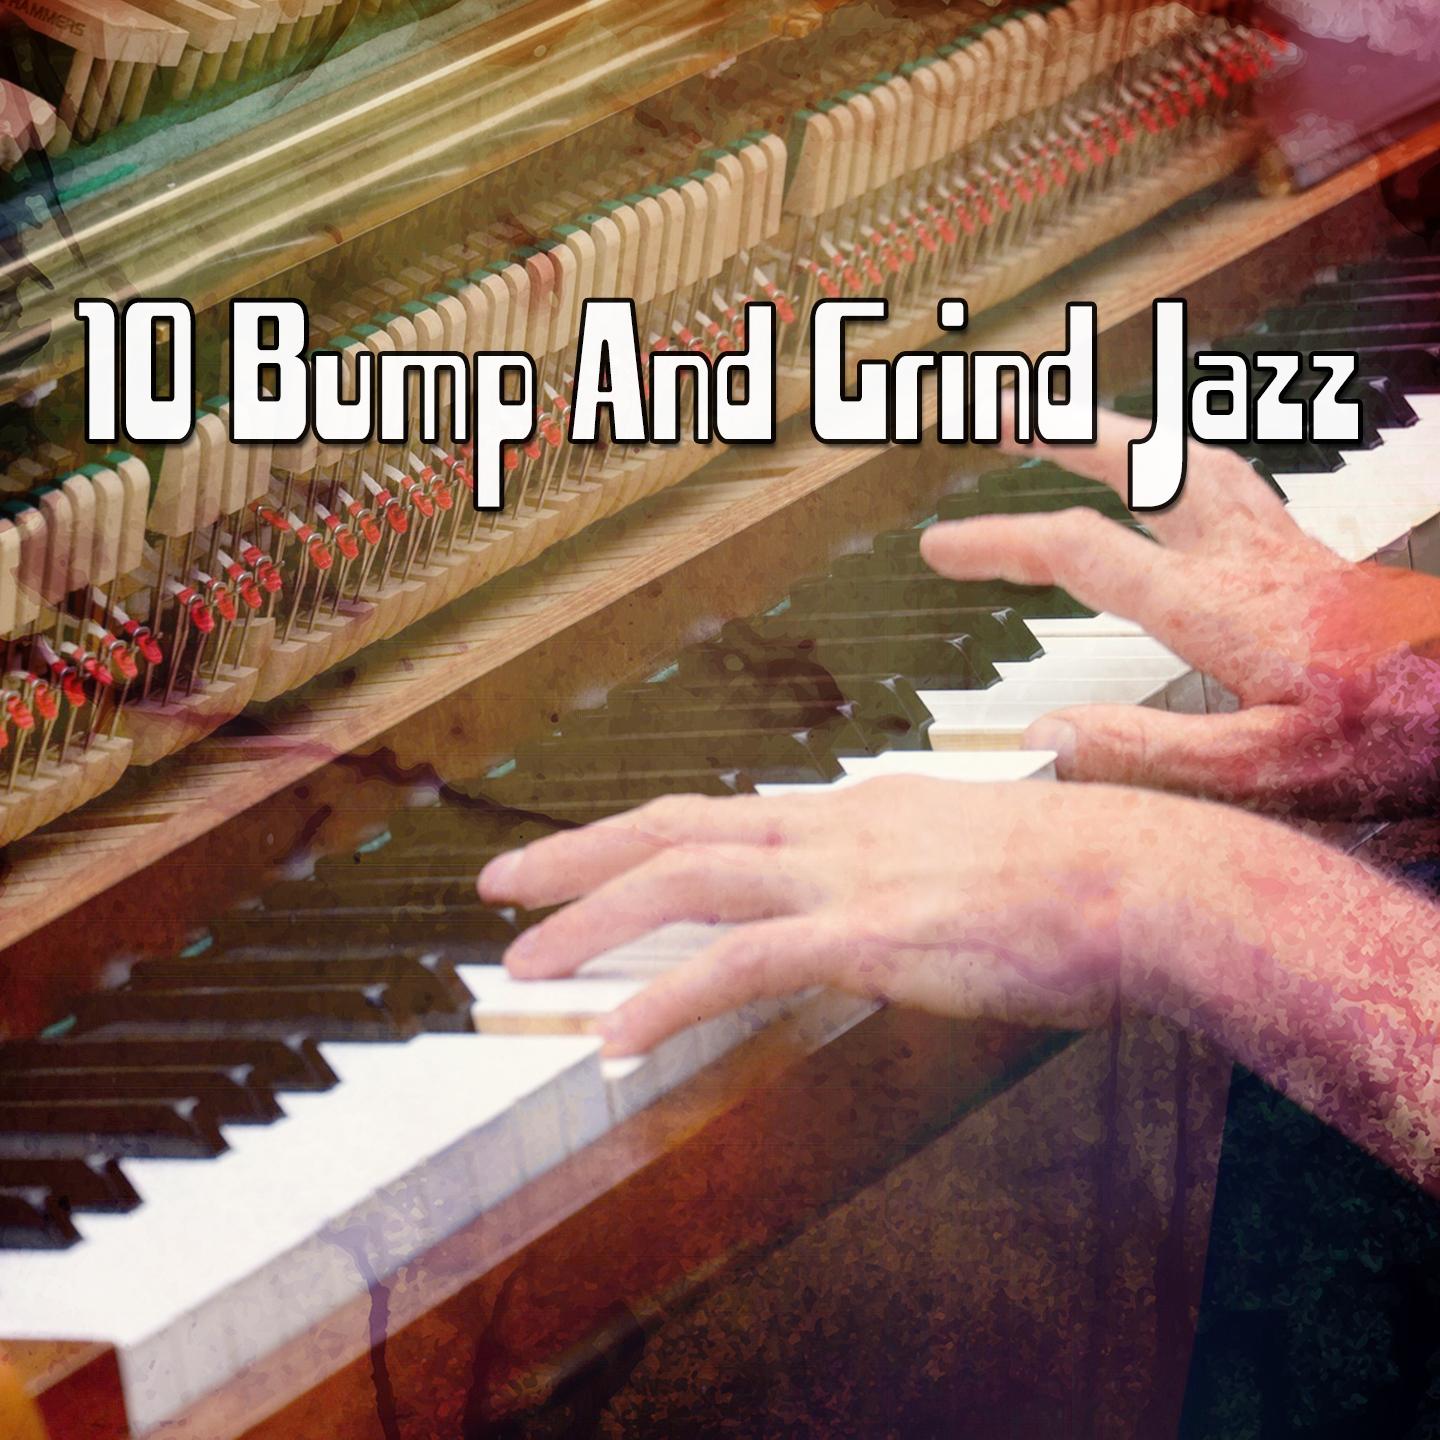 10 Bump And Grind Jazz